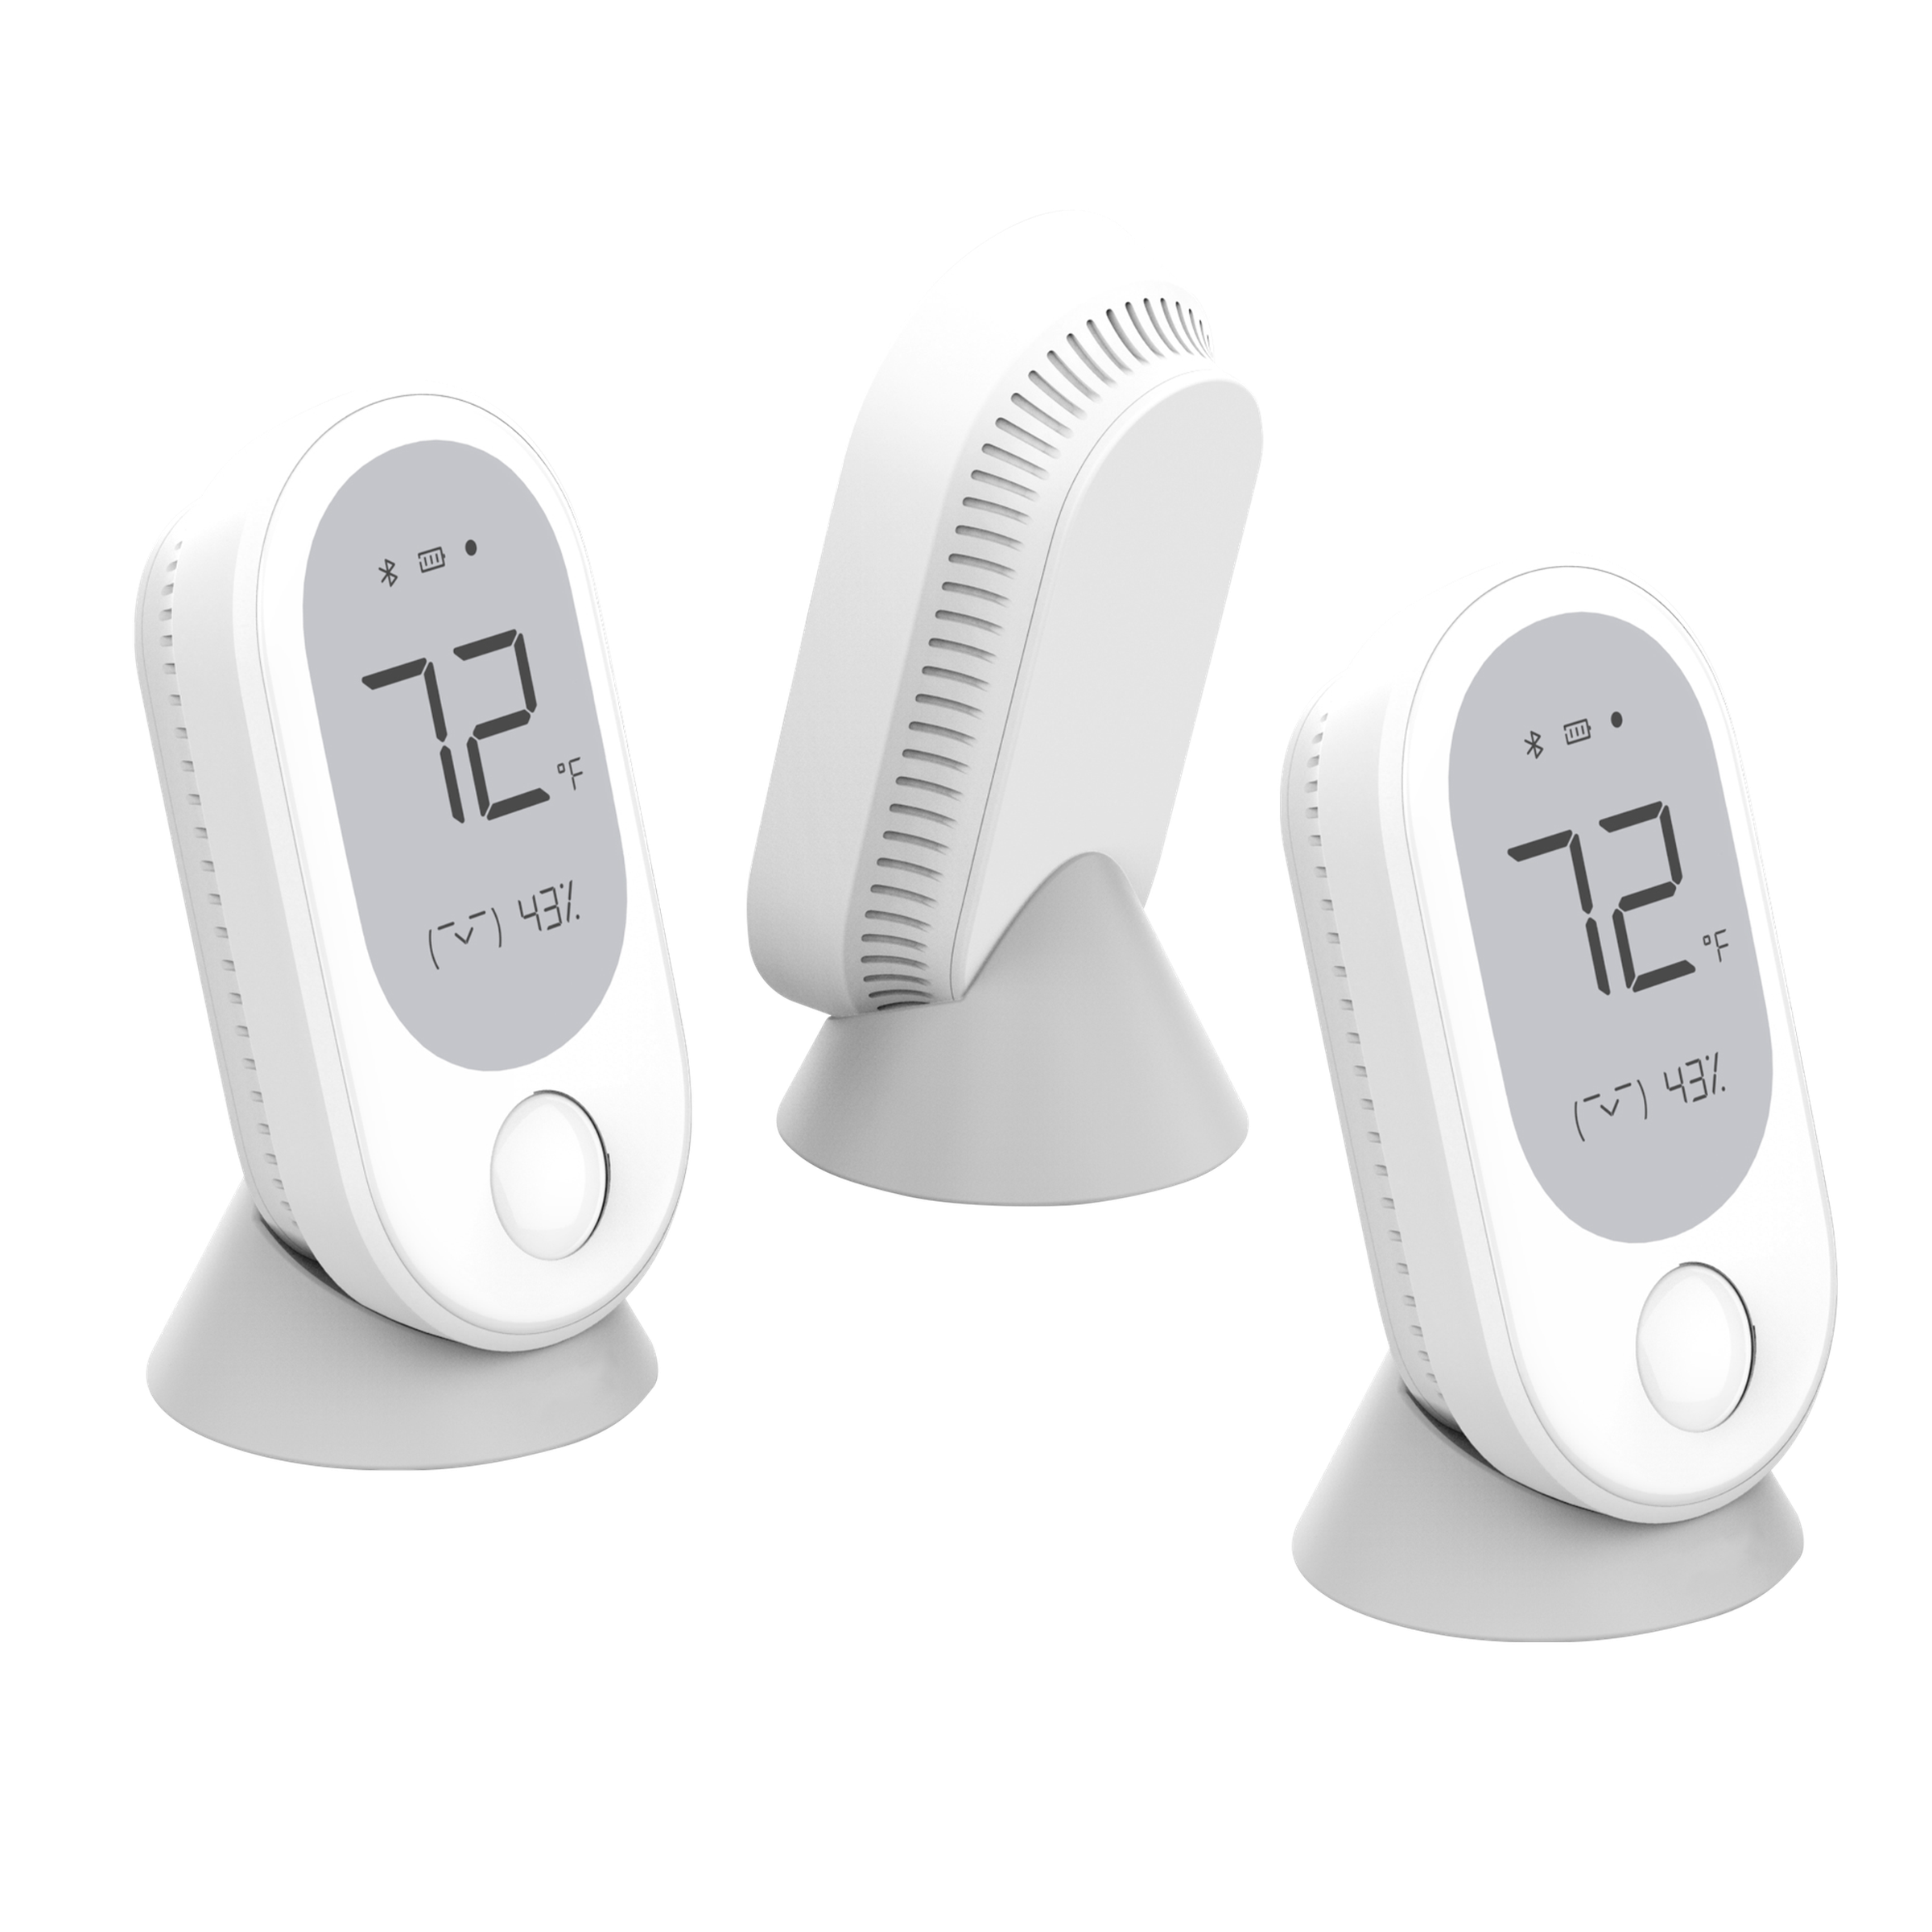 Each Wyze Room Sensor weighs 40 grams and is 5 inches tall. They can sit on a magnetic mount or be attached to a wall with double-sided tape.